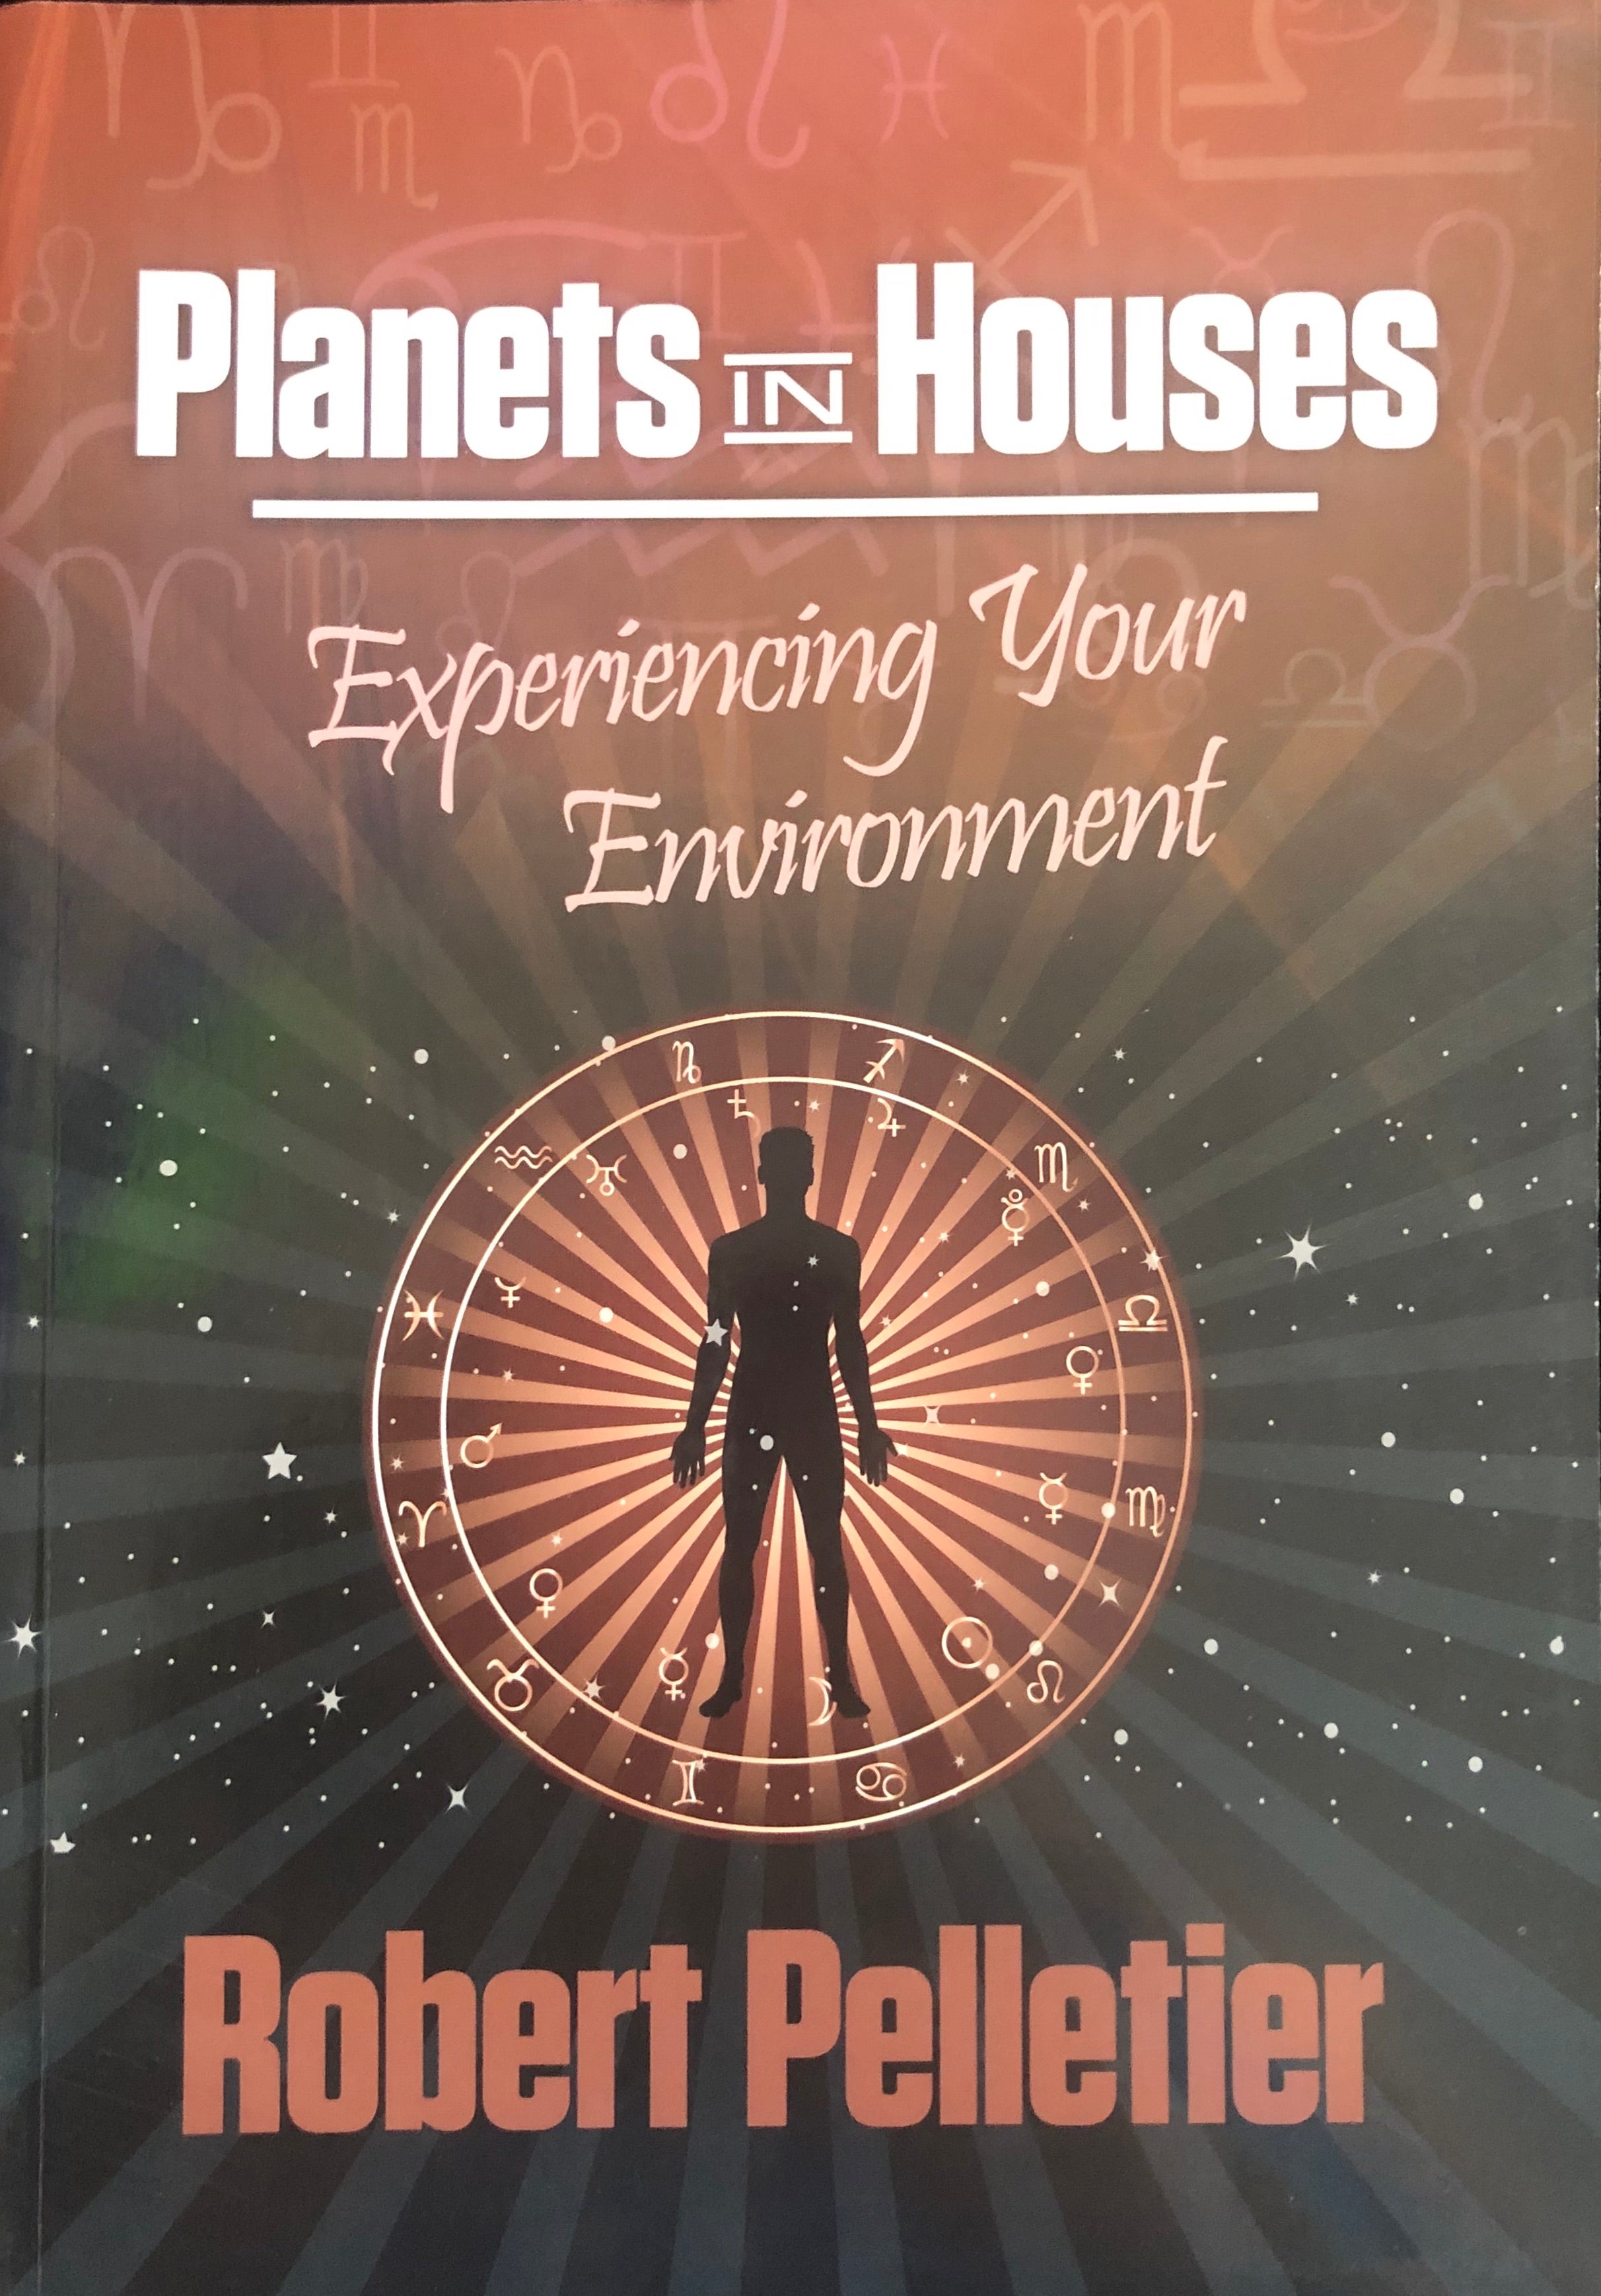 Planets in Houses: Experiencing Your Environment; Robert Pelletier